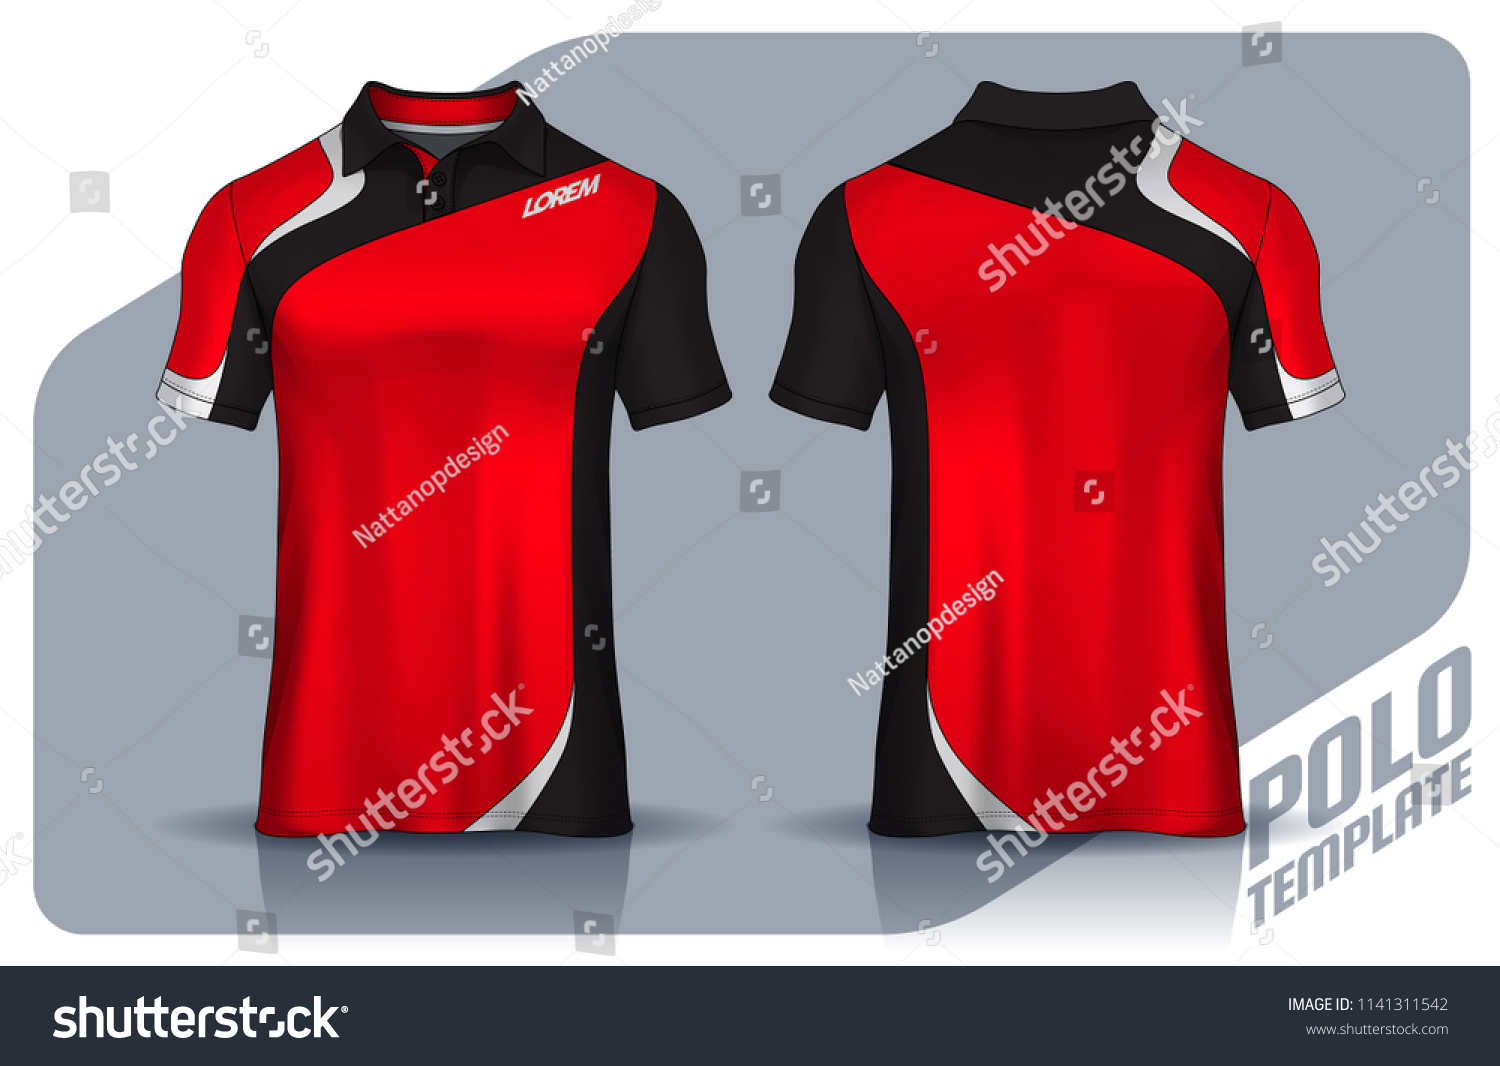 Jersey-polo Images, Stock Photos & Vectors | Shutterstock